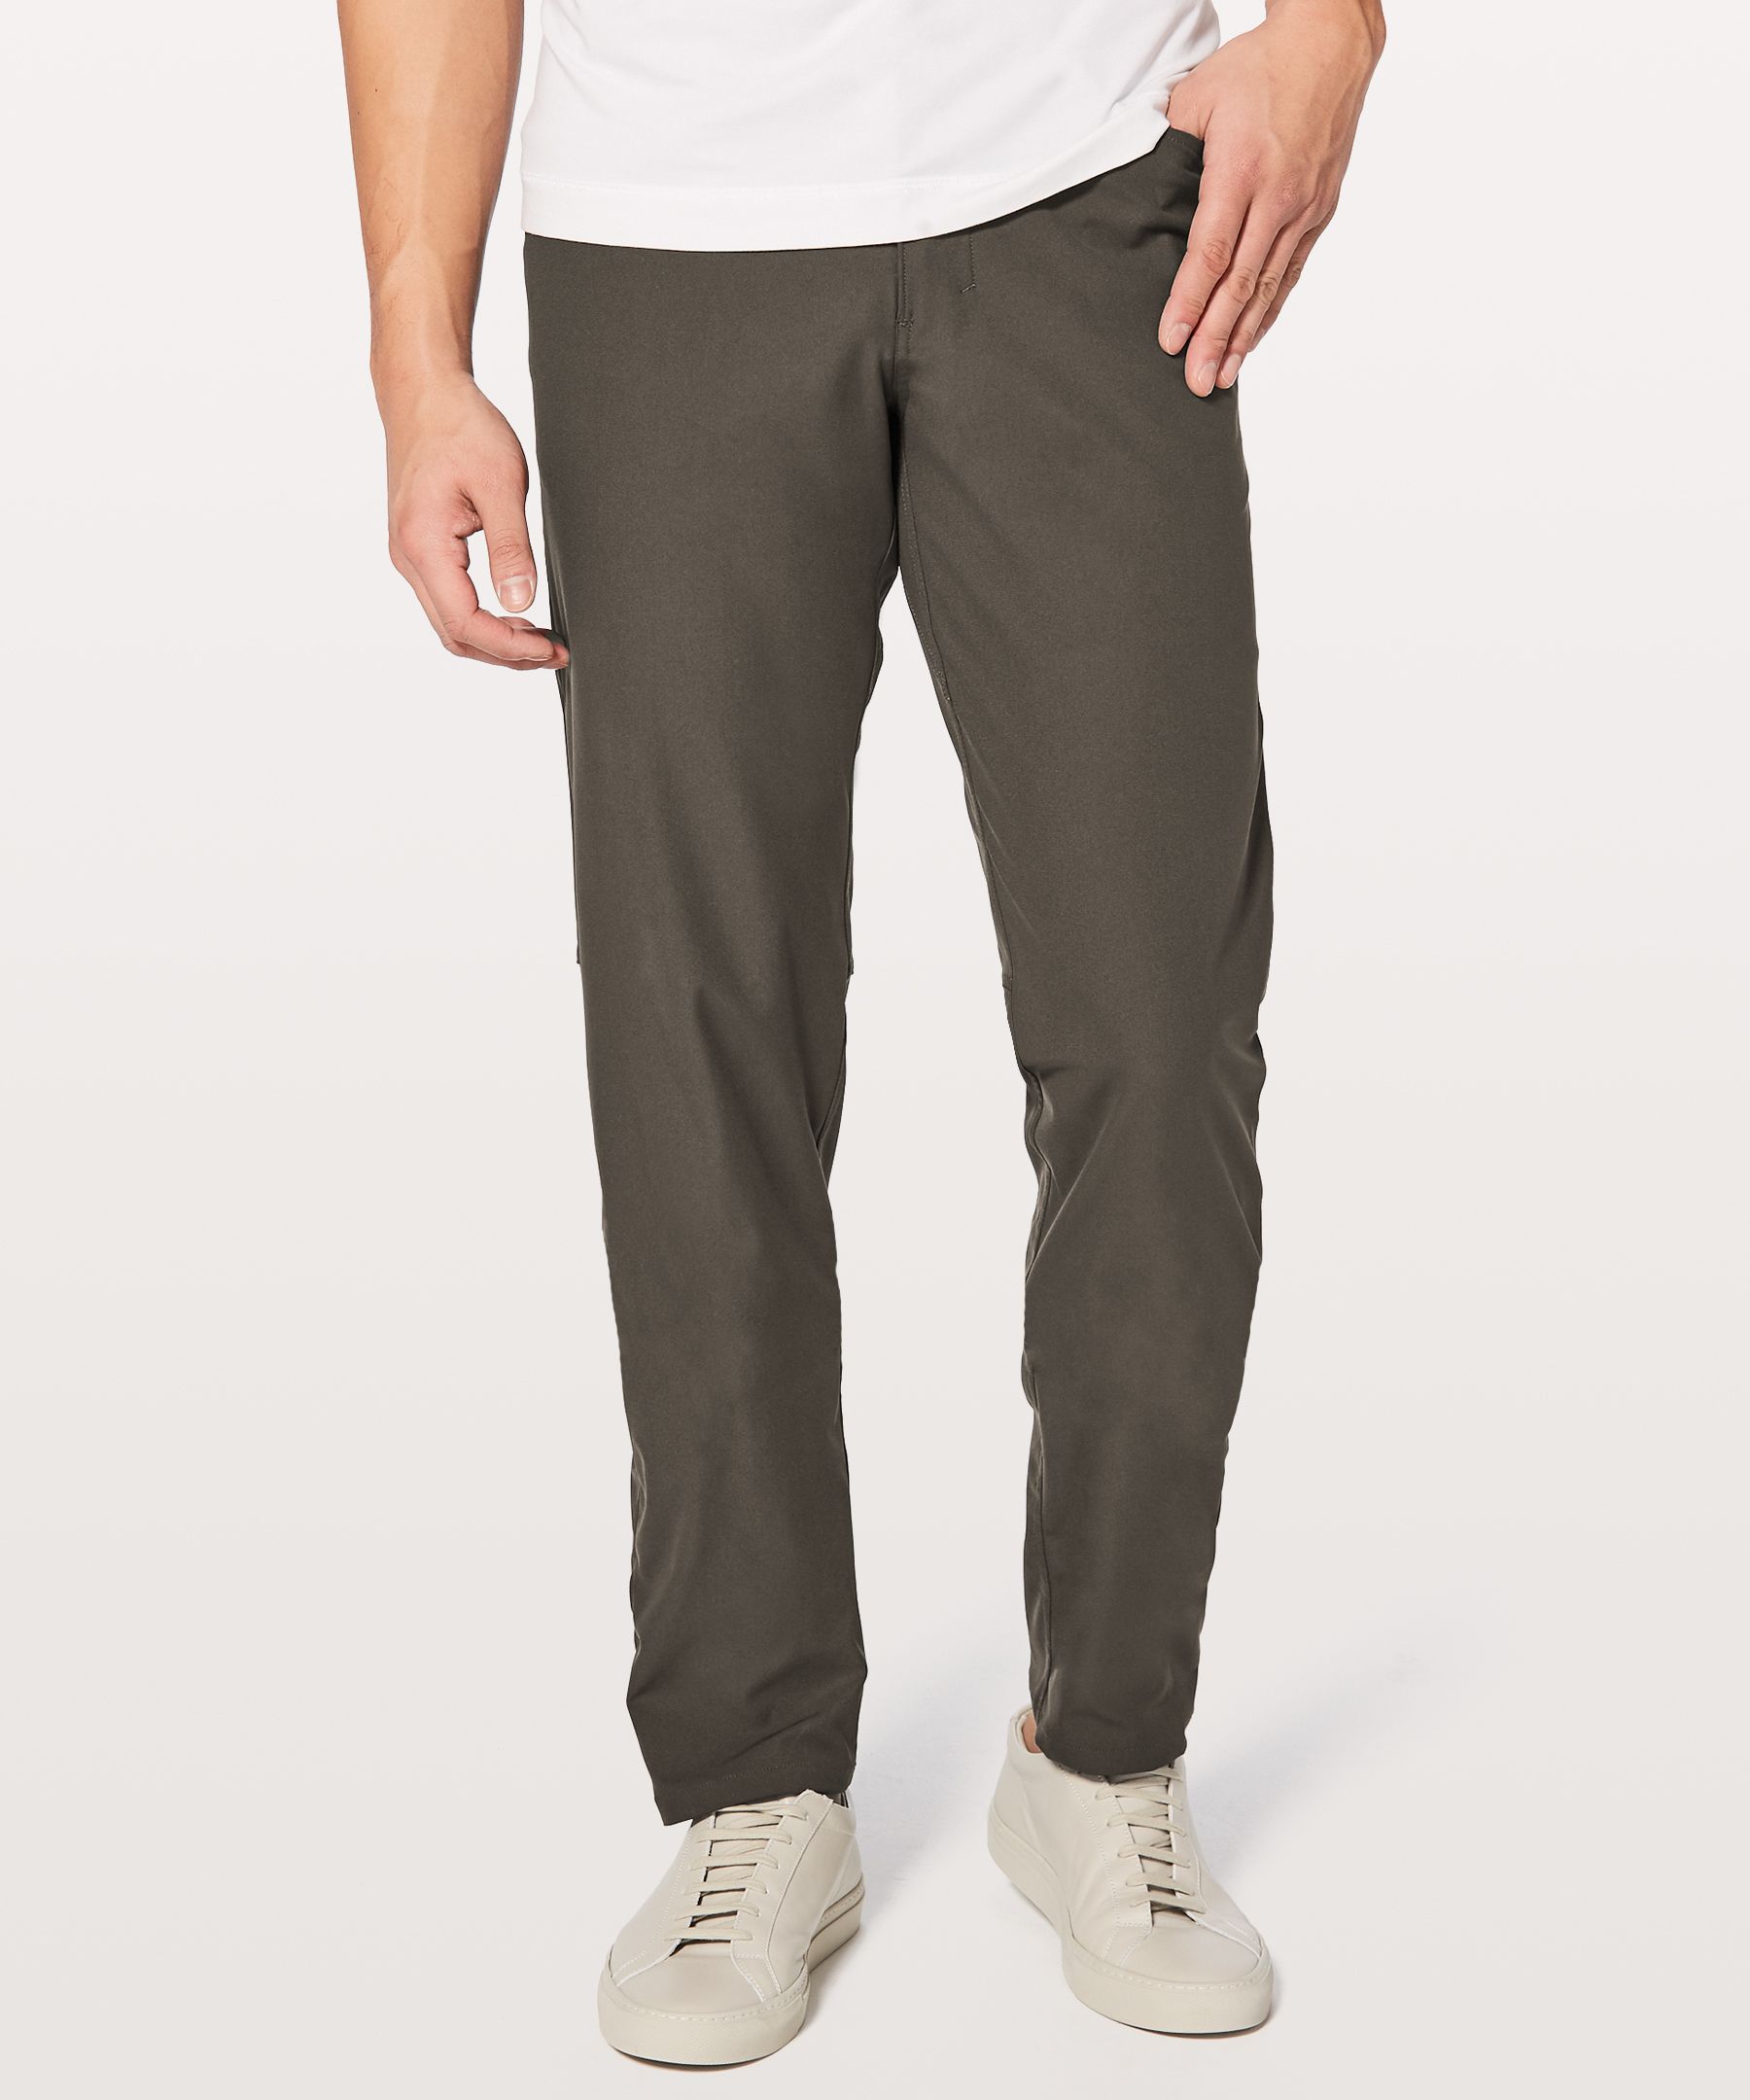 Lululemon Abc Pant Classic *warpstreme 37" Online Only In Stoney